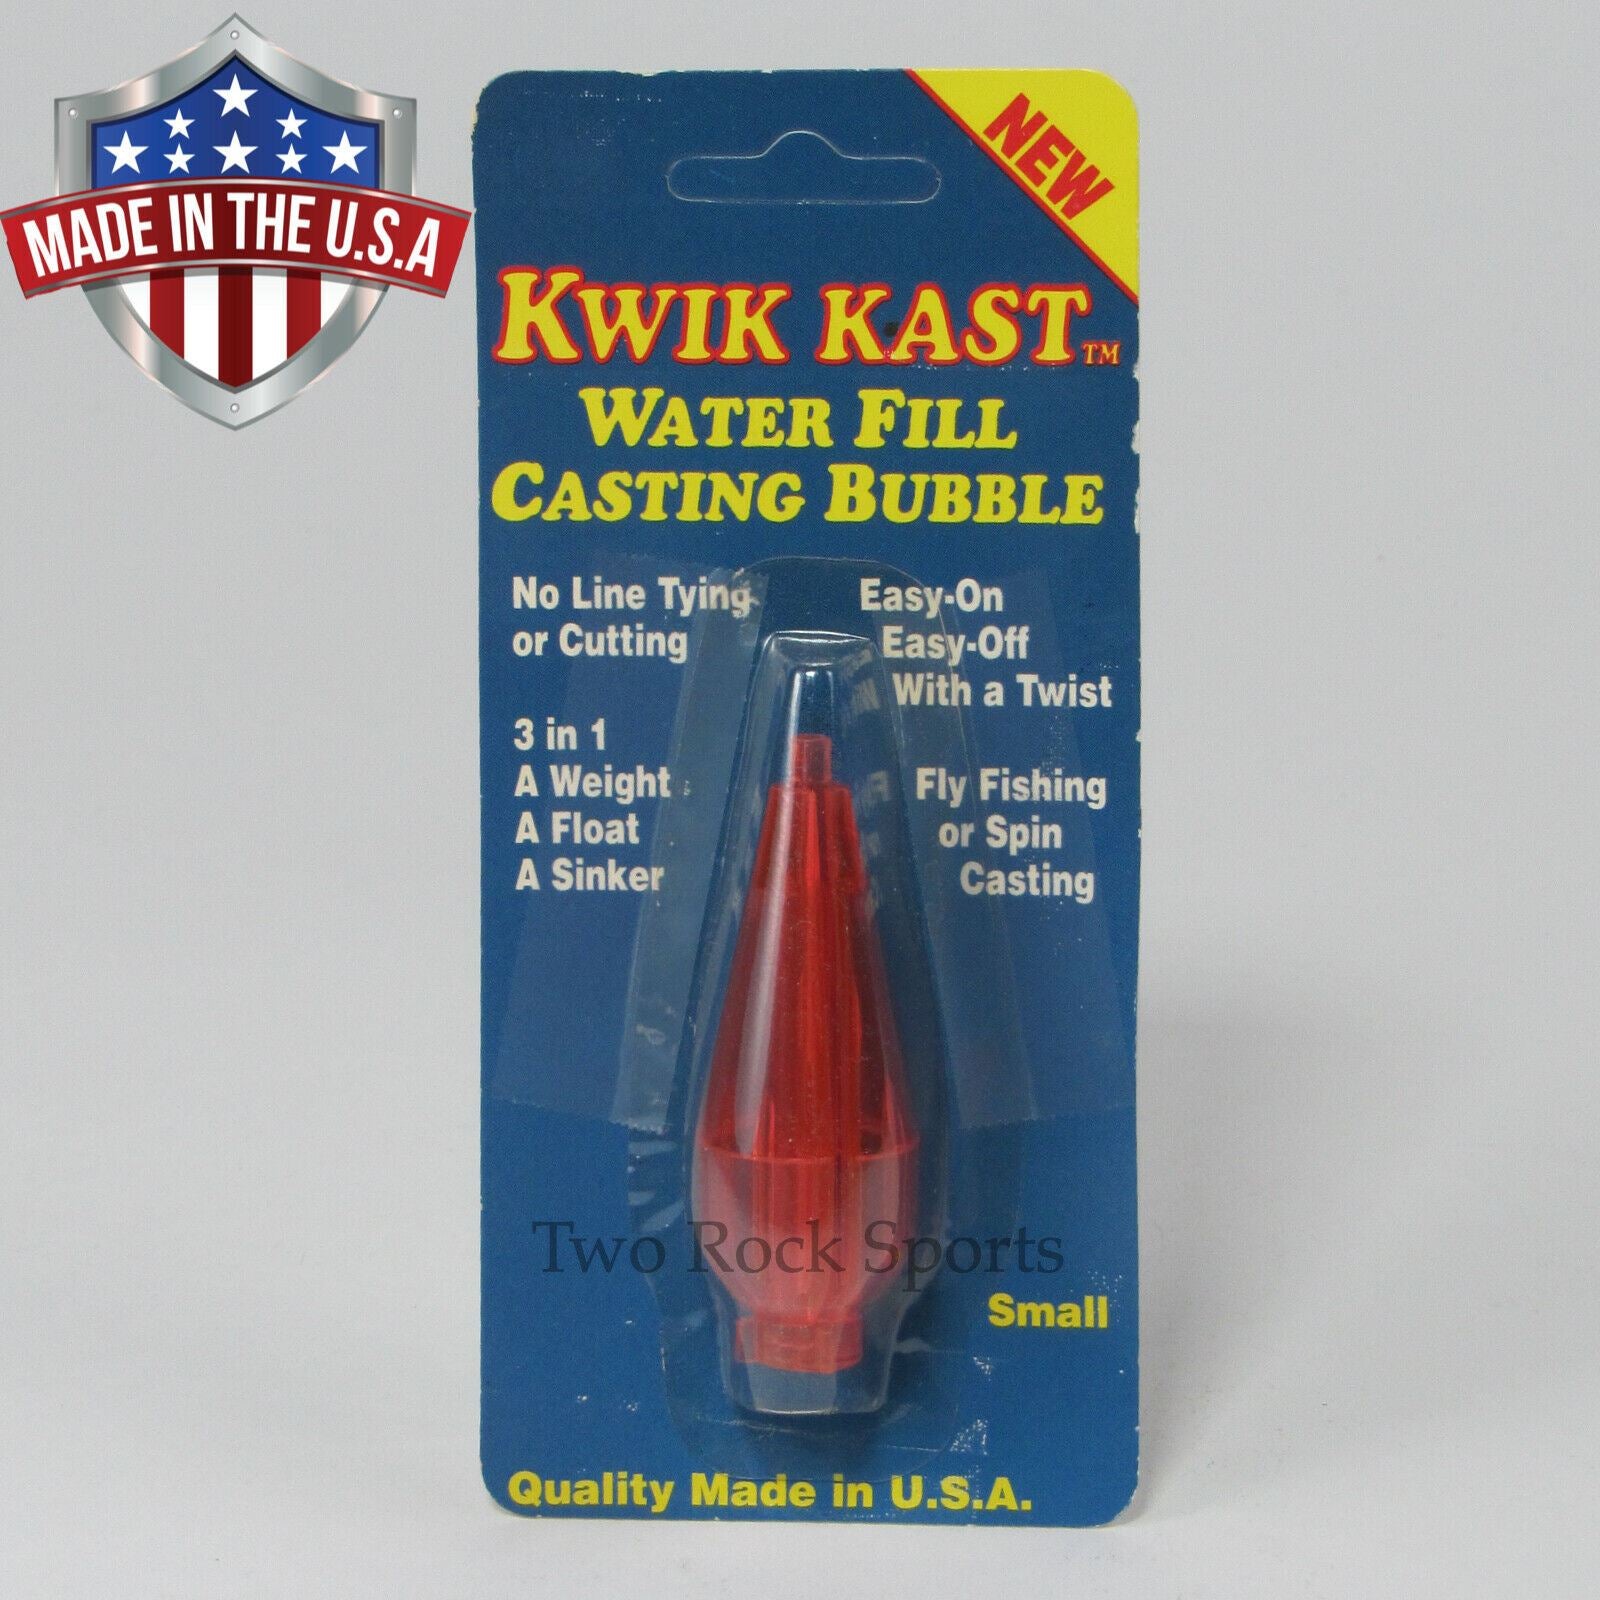 KWIK KAST - RED - Casting Bubble fly fishing float - USA made